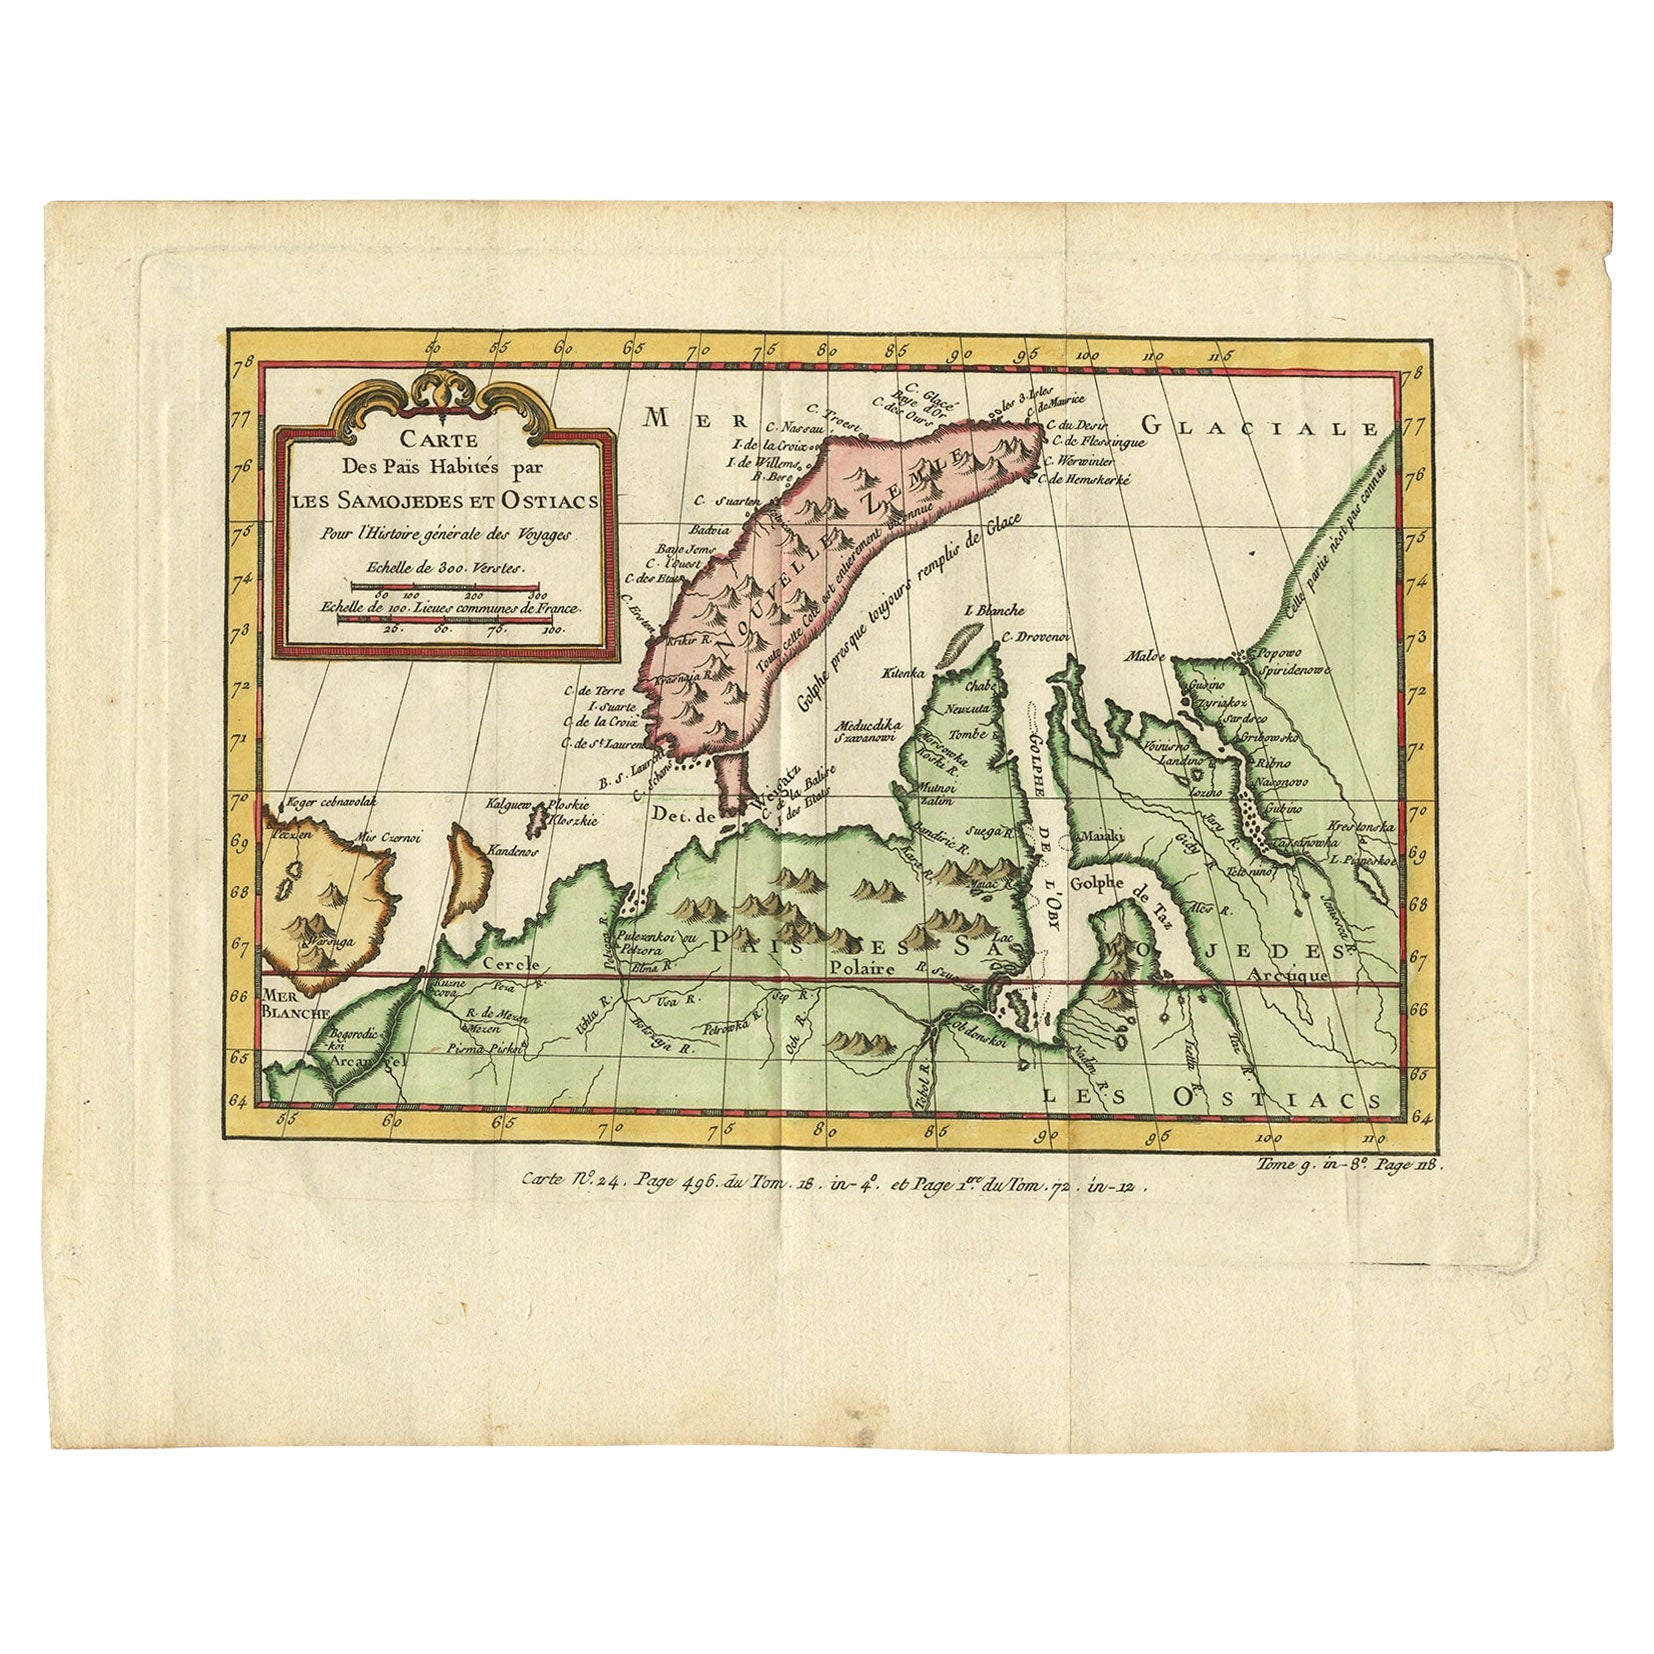 Antique Map of Novaya Zemlya and the Russian Mainland by Bellin, c.1760